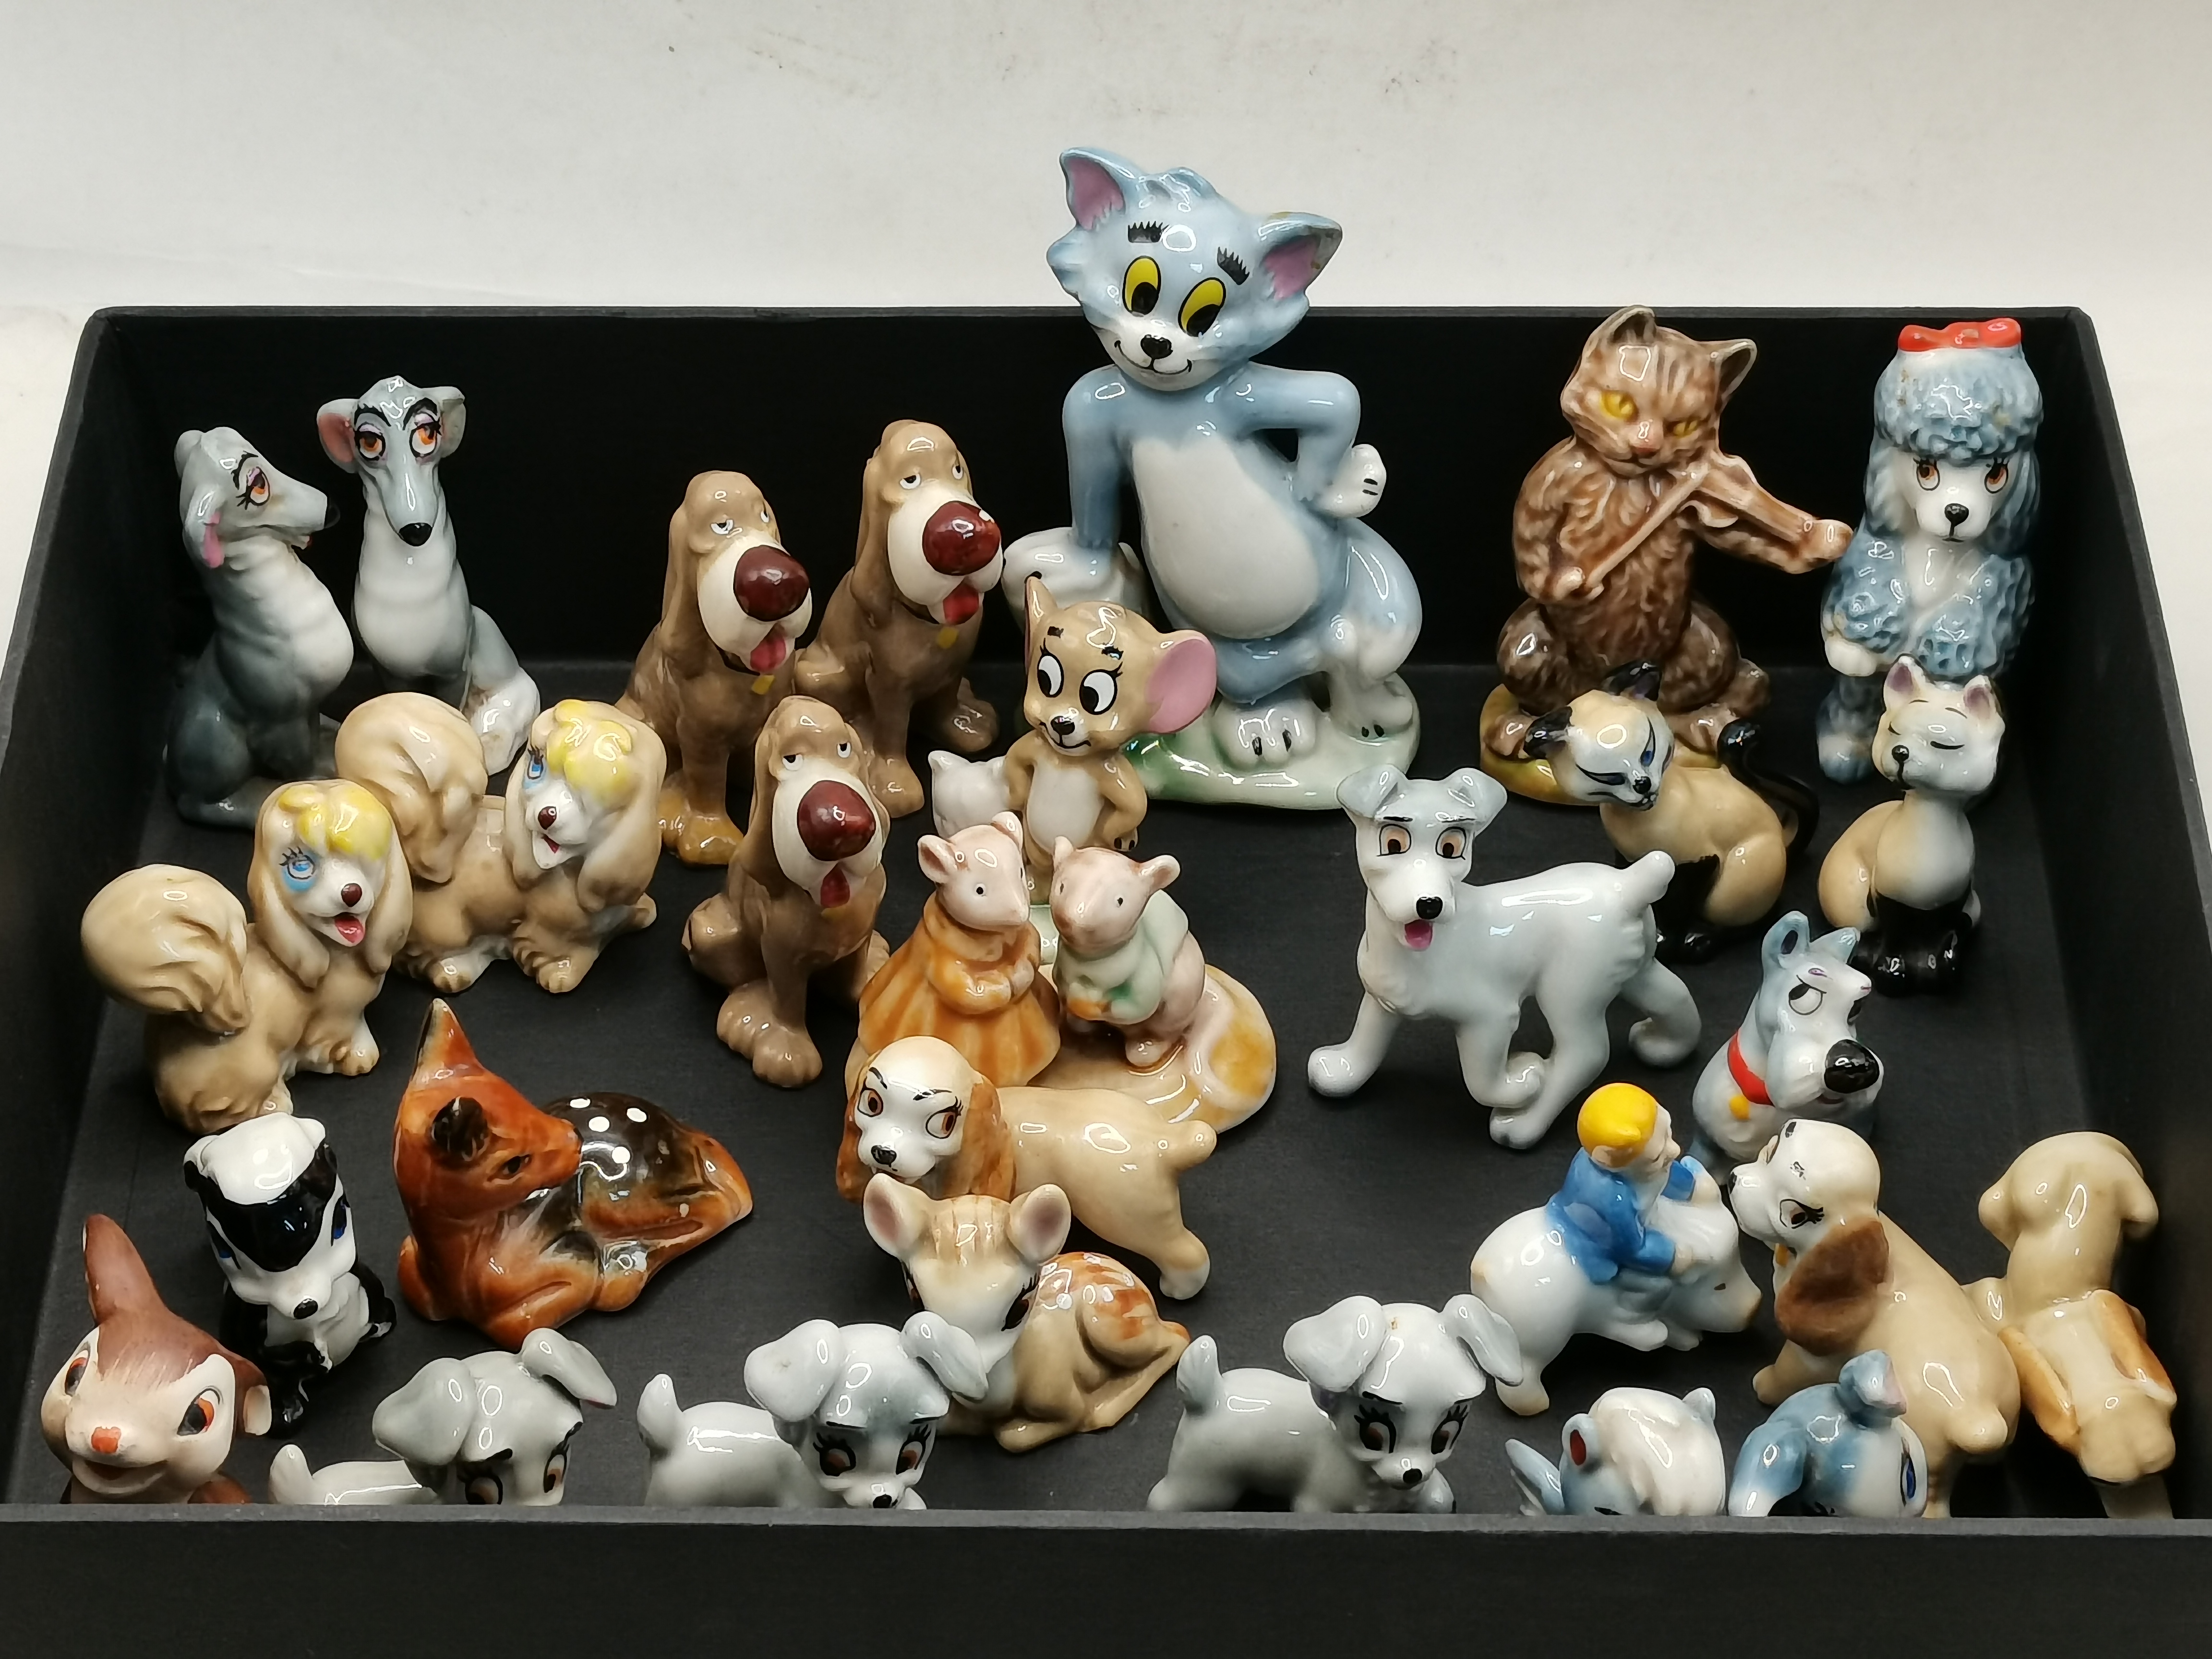 30 Wade Whimsies of DIsney Characters